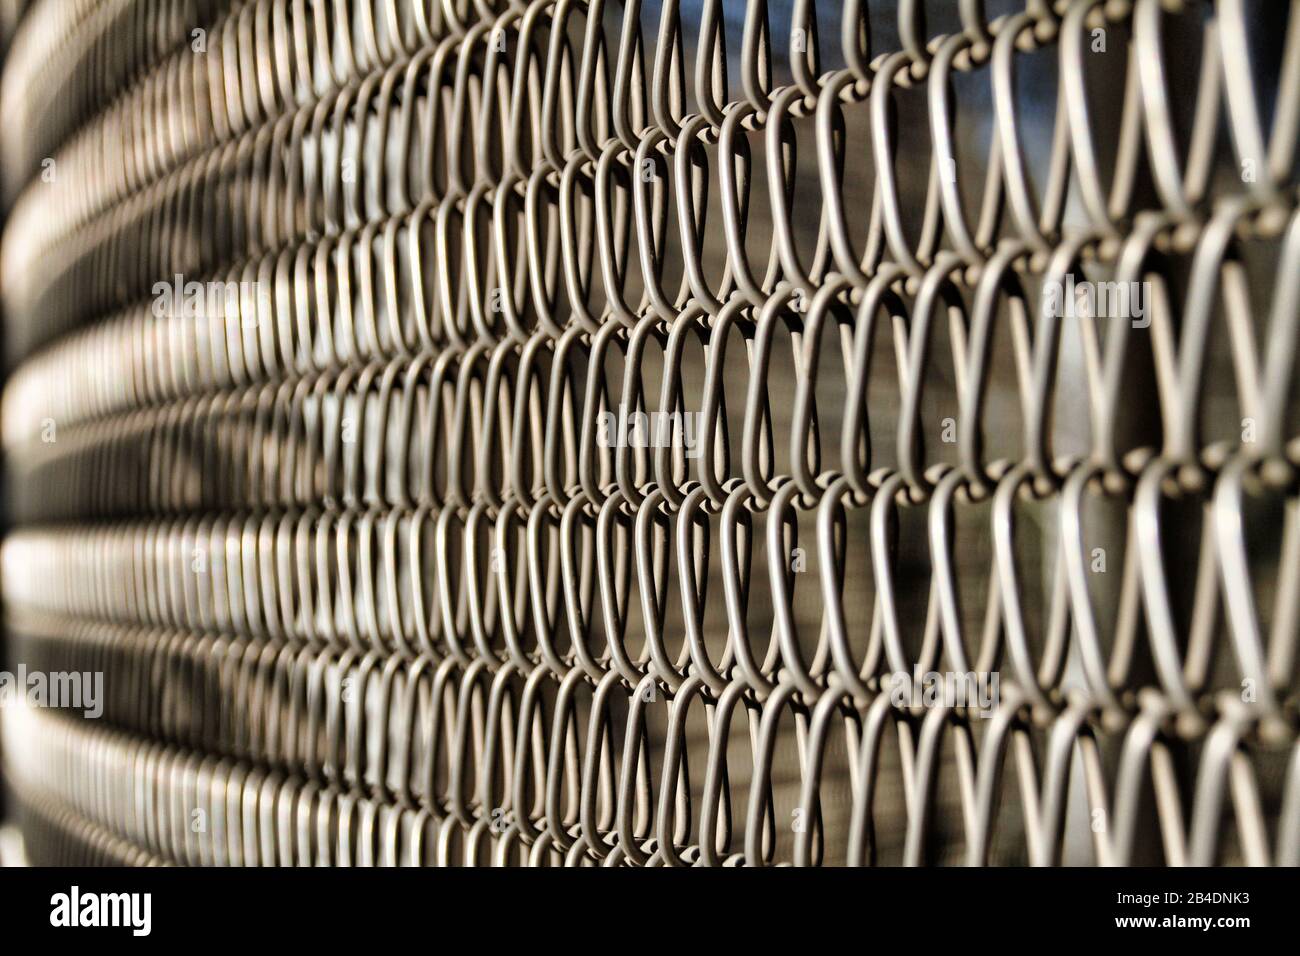 A close up view of a chain link fence creates an abstract pattern. Stock Photo